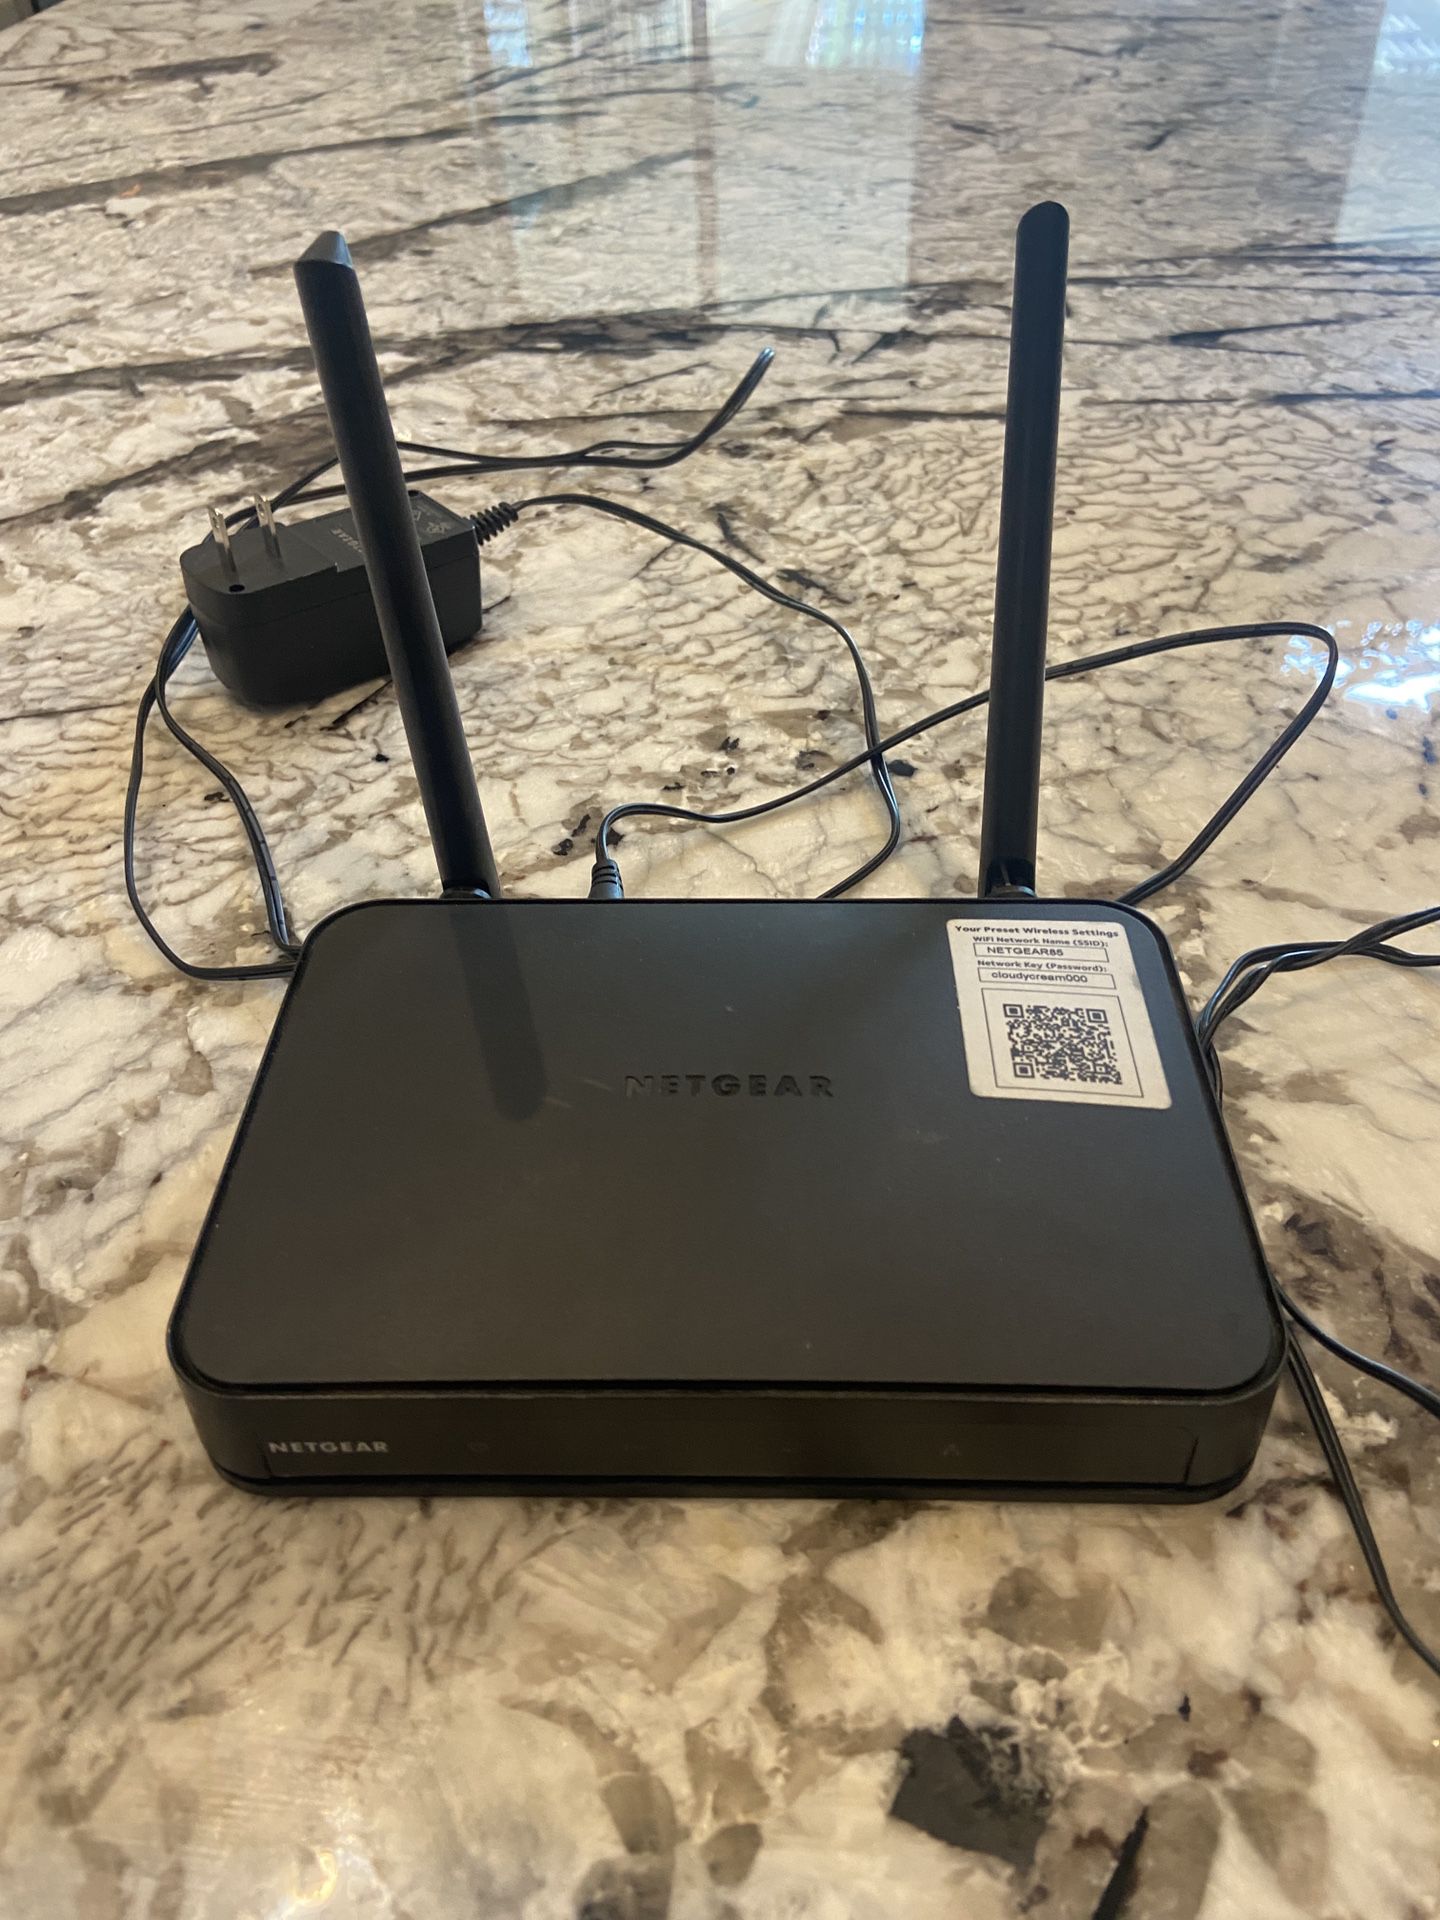 2 Wifi Routers Linksys and Netgear